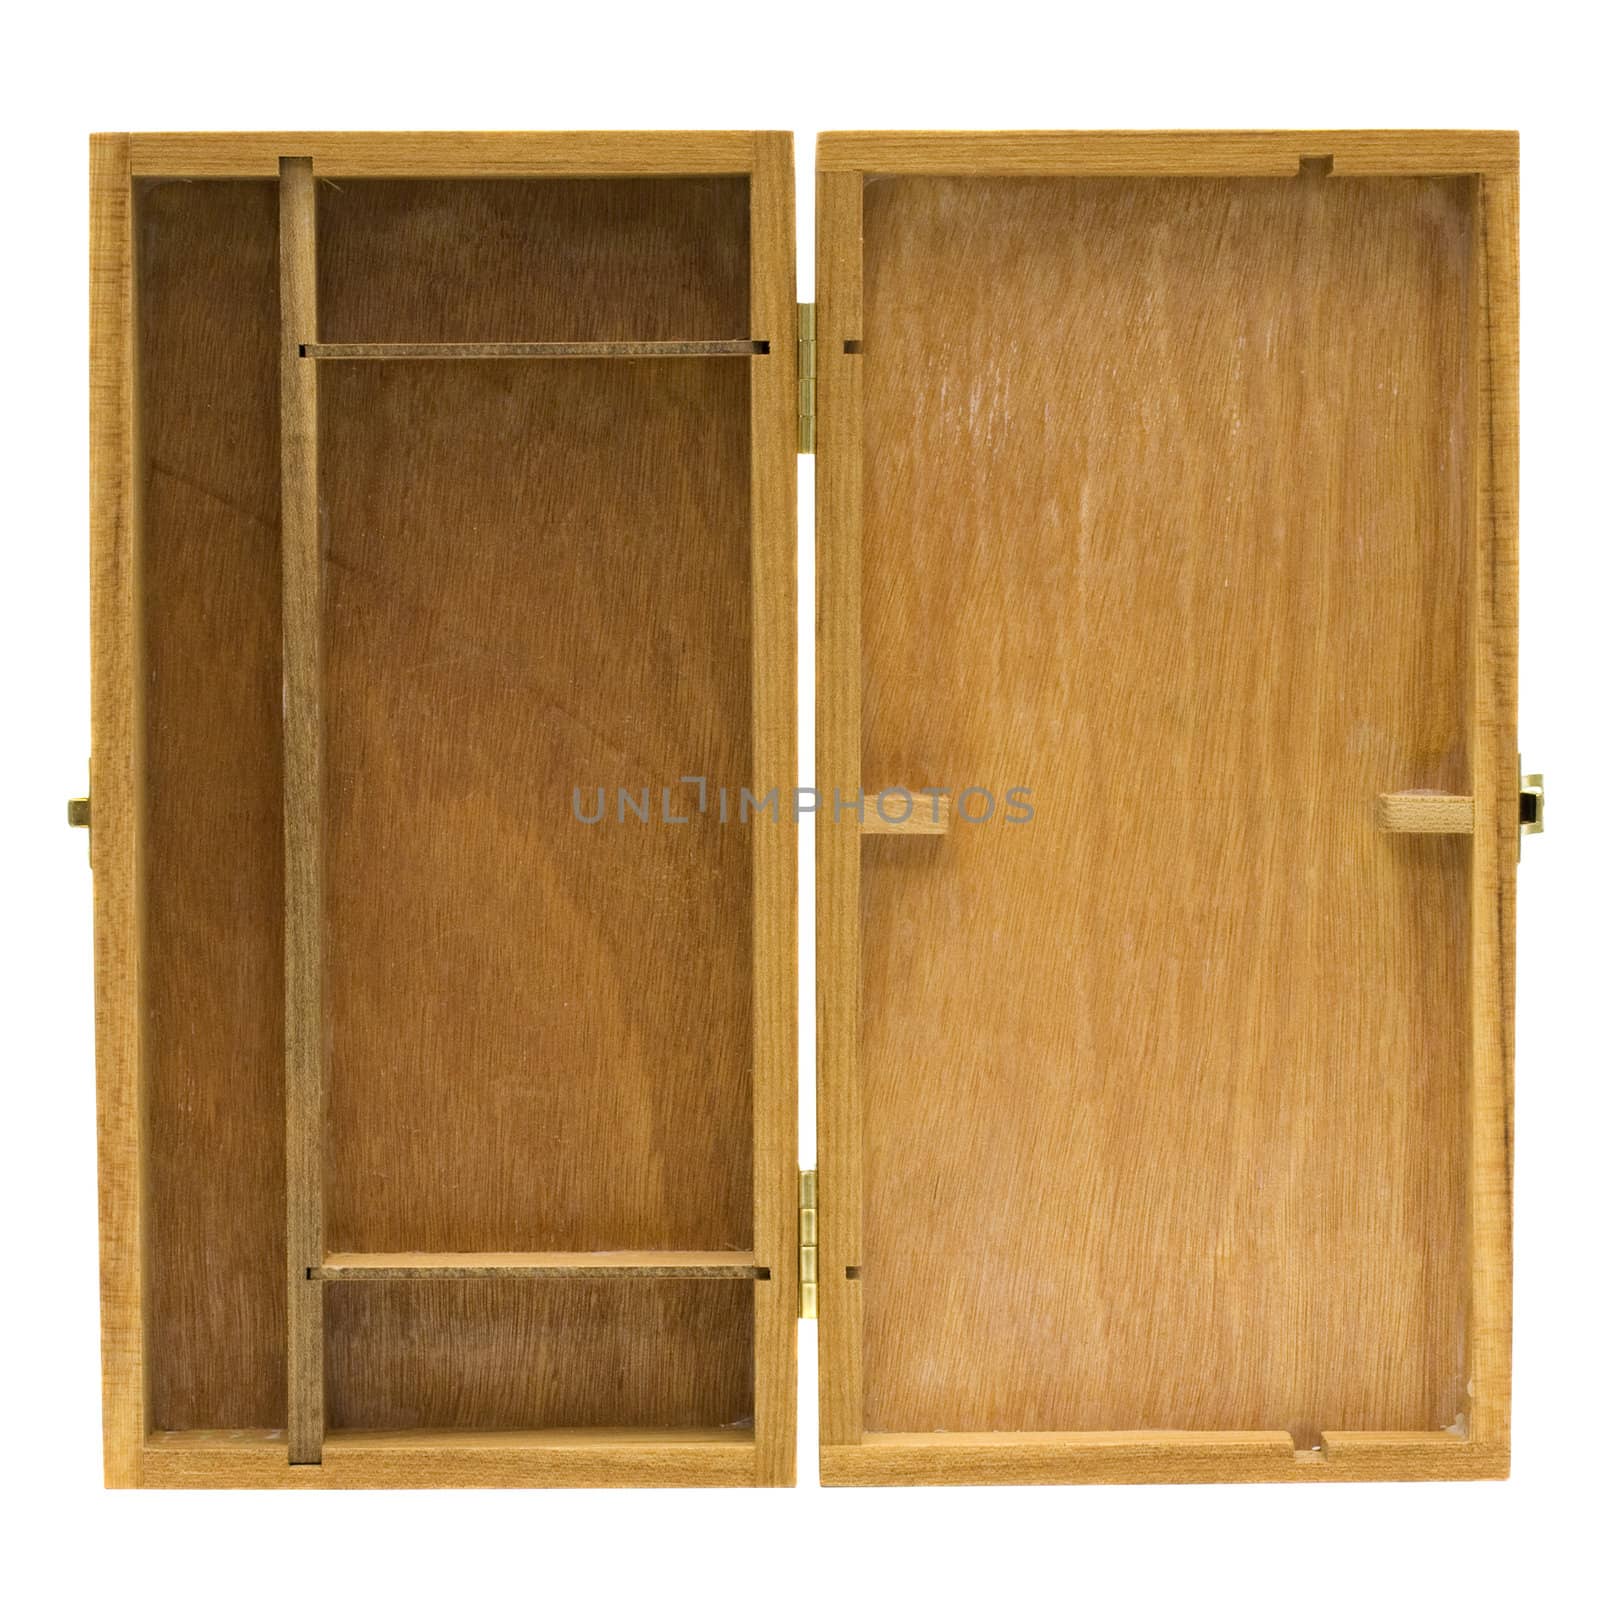 open old wooden box with dividers used for art supplies, scratches and stains, isolated on white